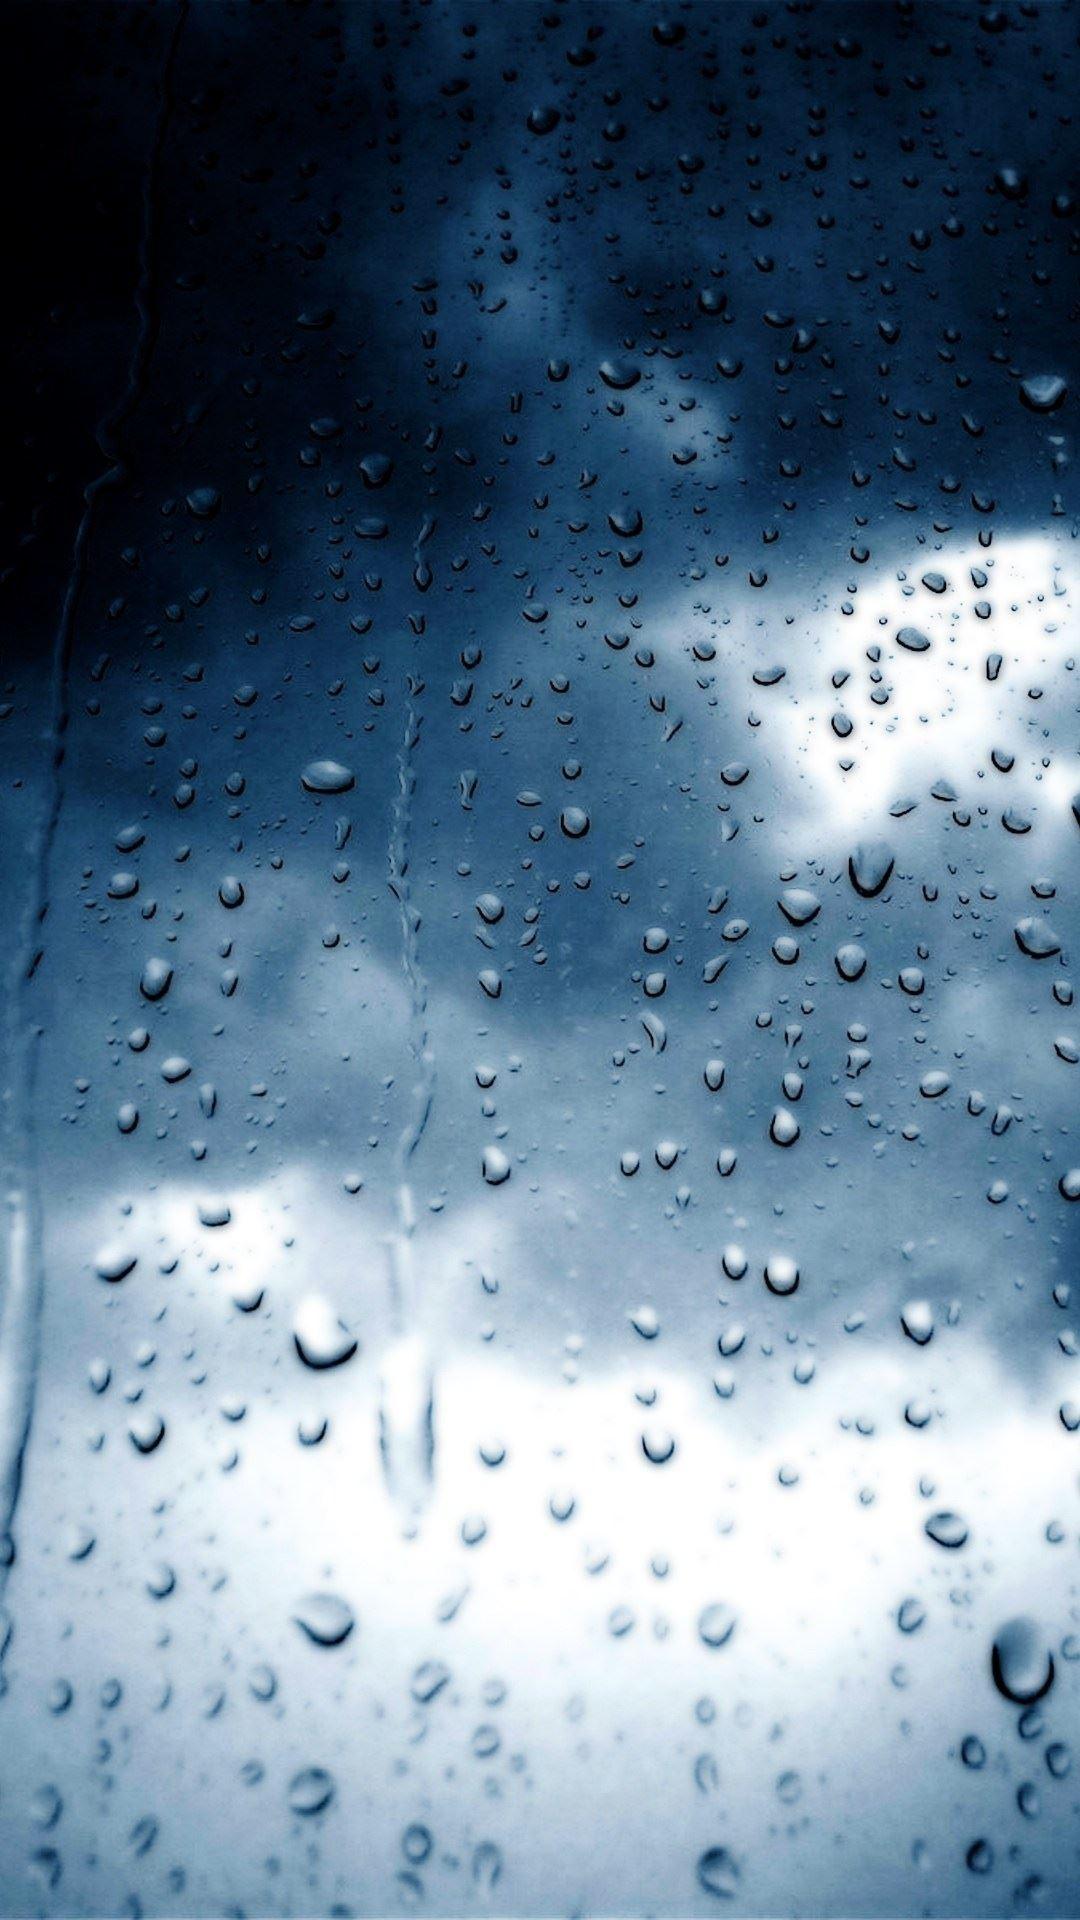 Rain Wallpaper Android, Picture